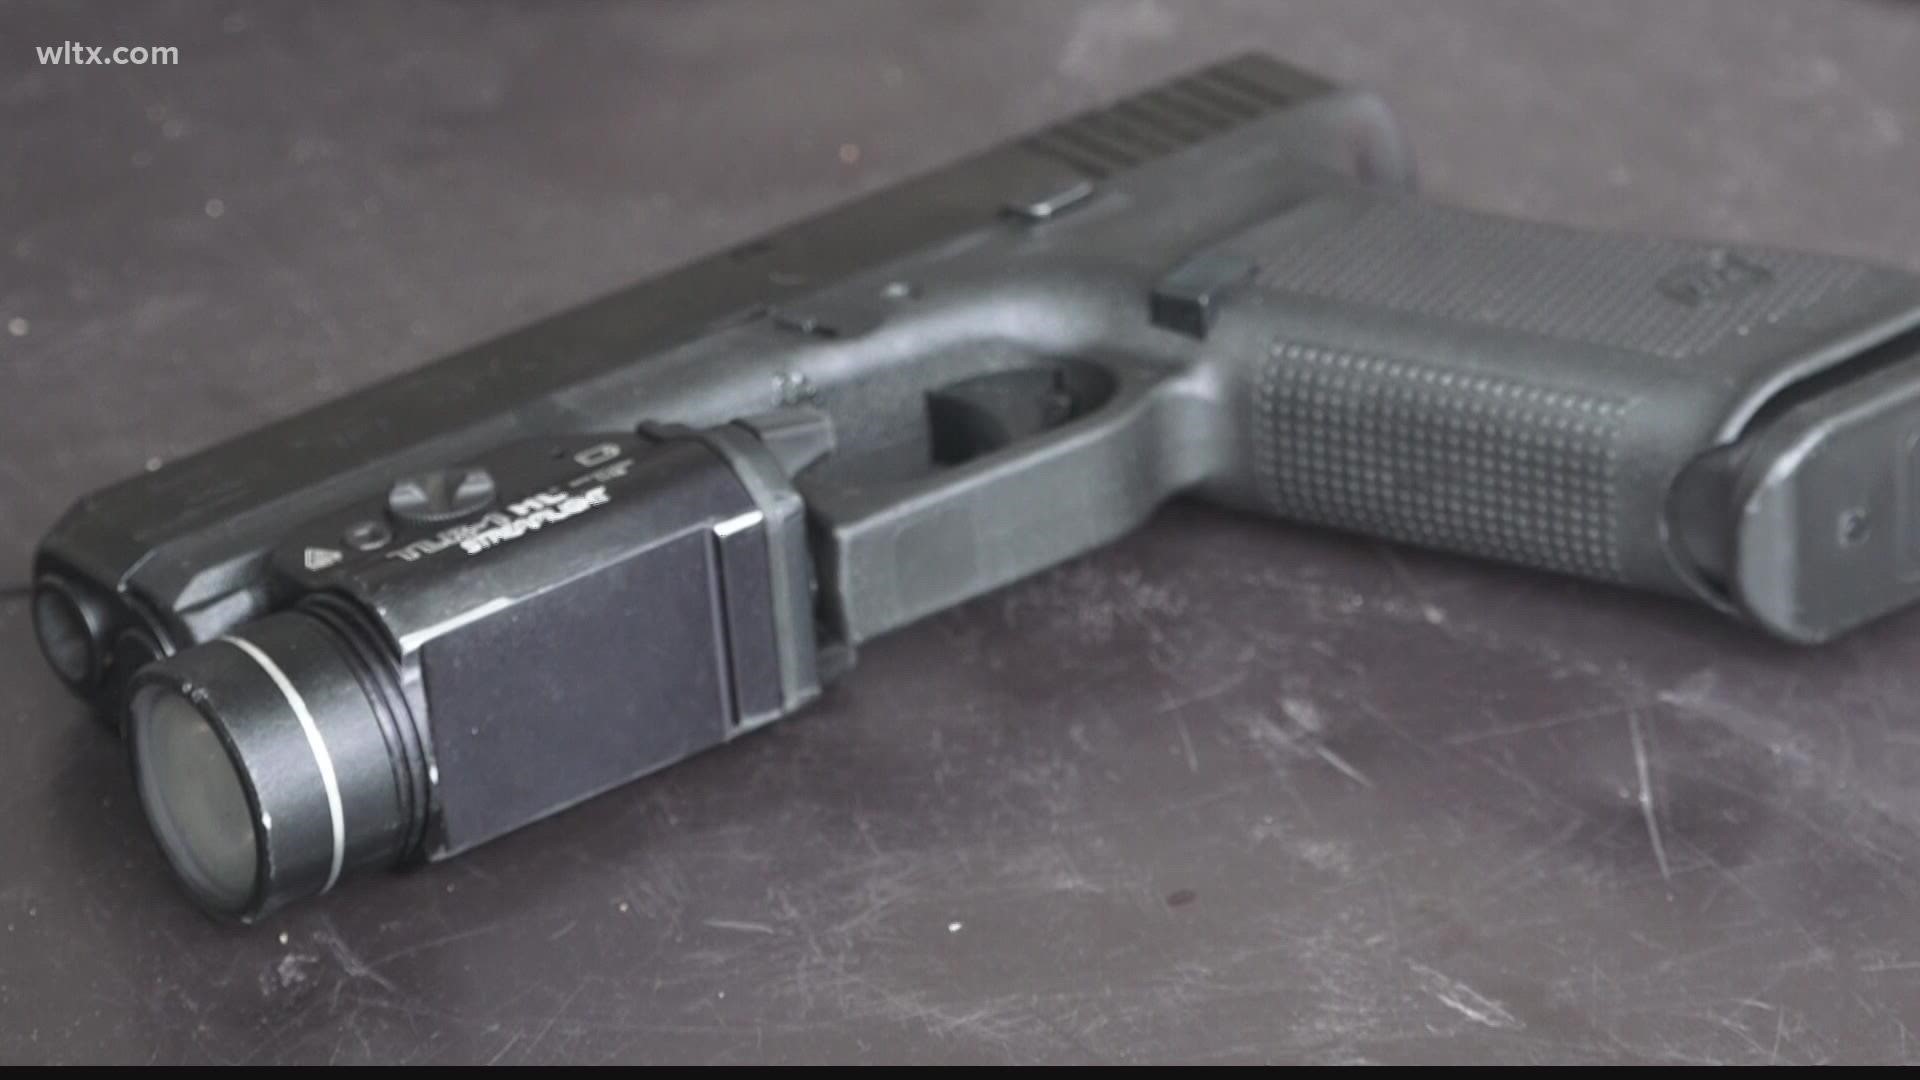 A proposed ordinance for reporting lost or stolen guns has been in talks for months. Now, it is slated to go before Columbia City Council in September,